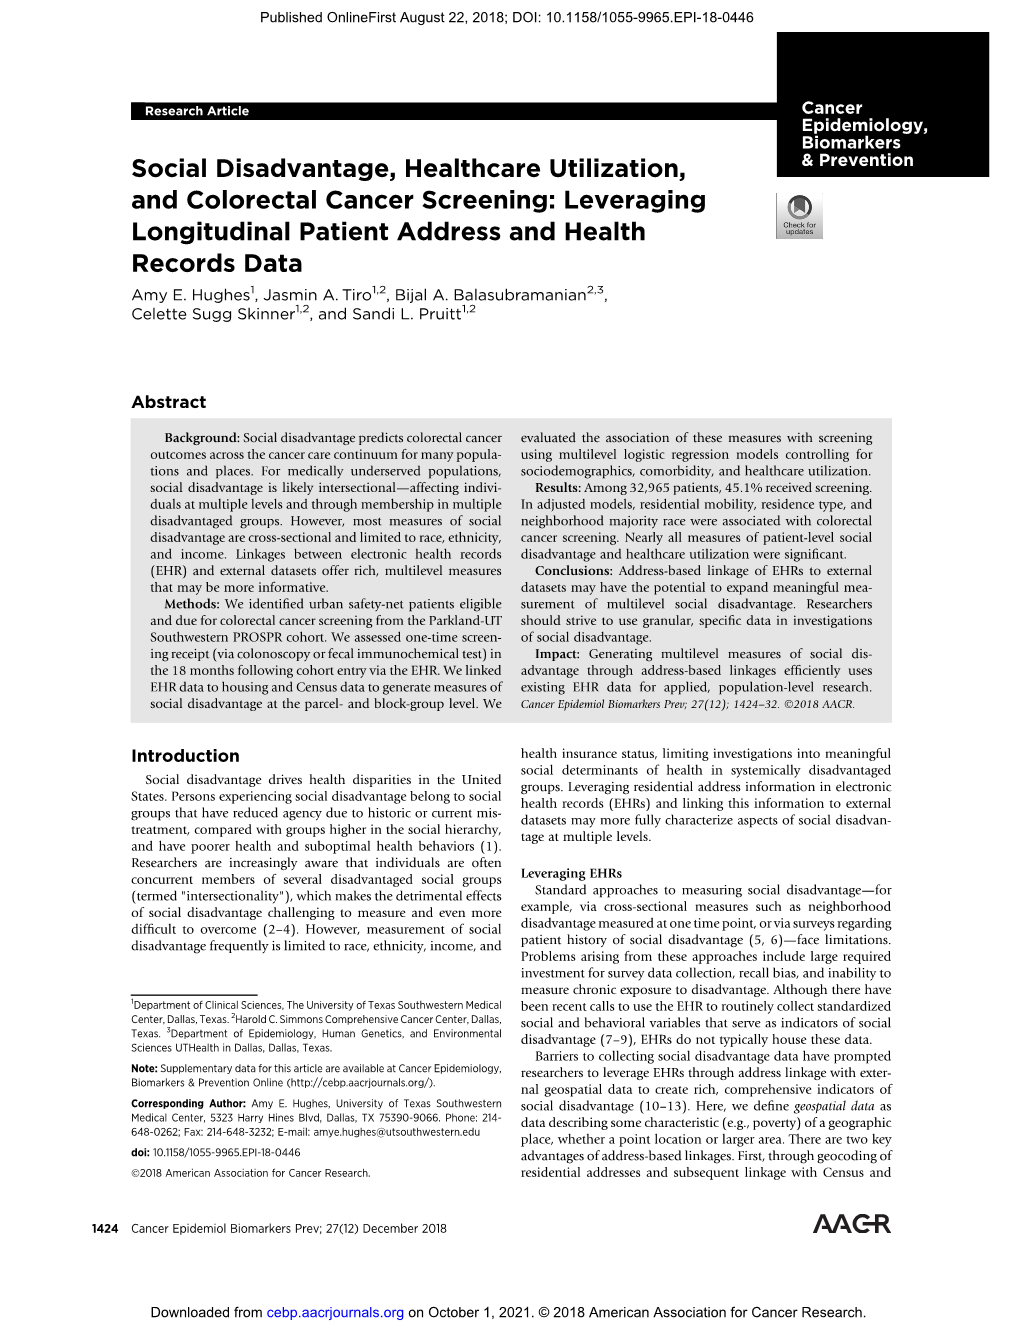 Social Disadvantage, Healthcare Utilization, and Colorectal Cancer Screening: Leveraging Longitudinal Patient Address and Health Records Data